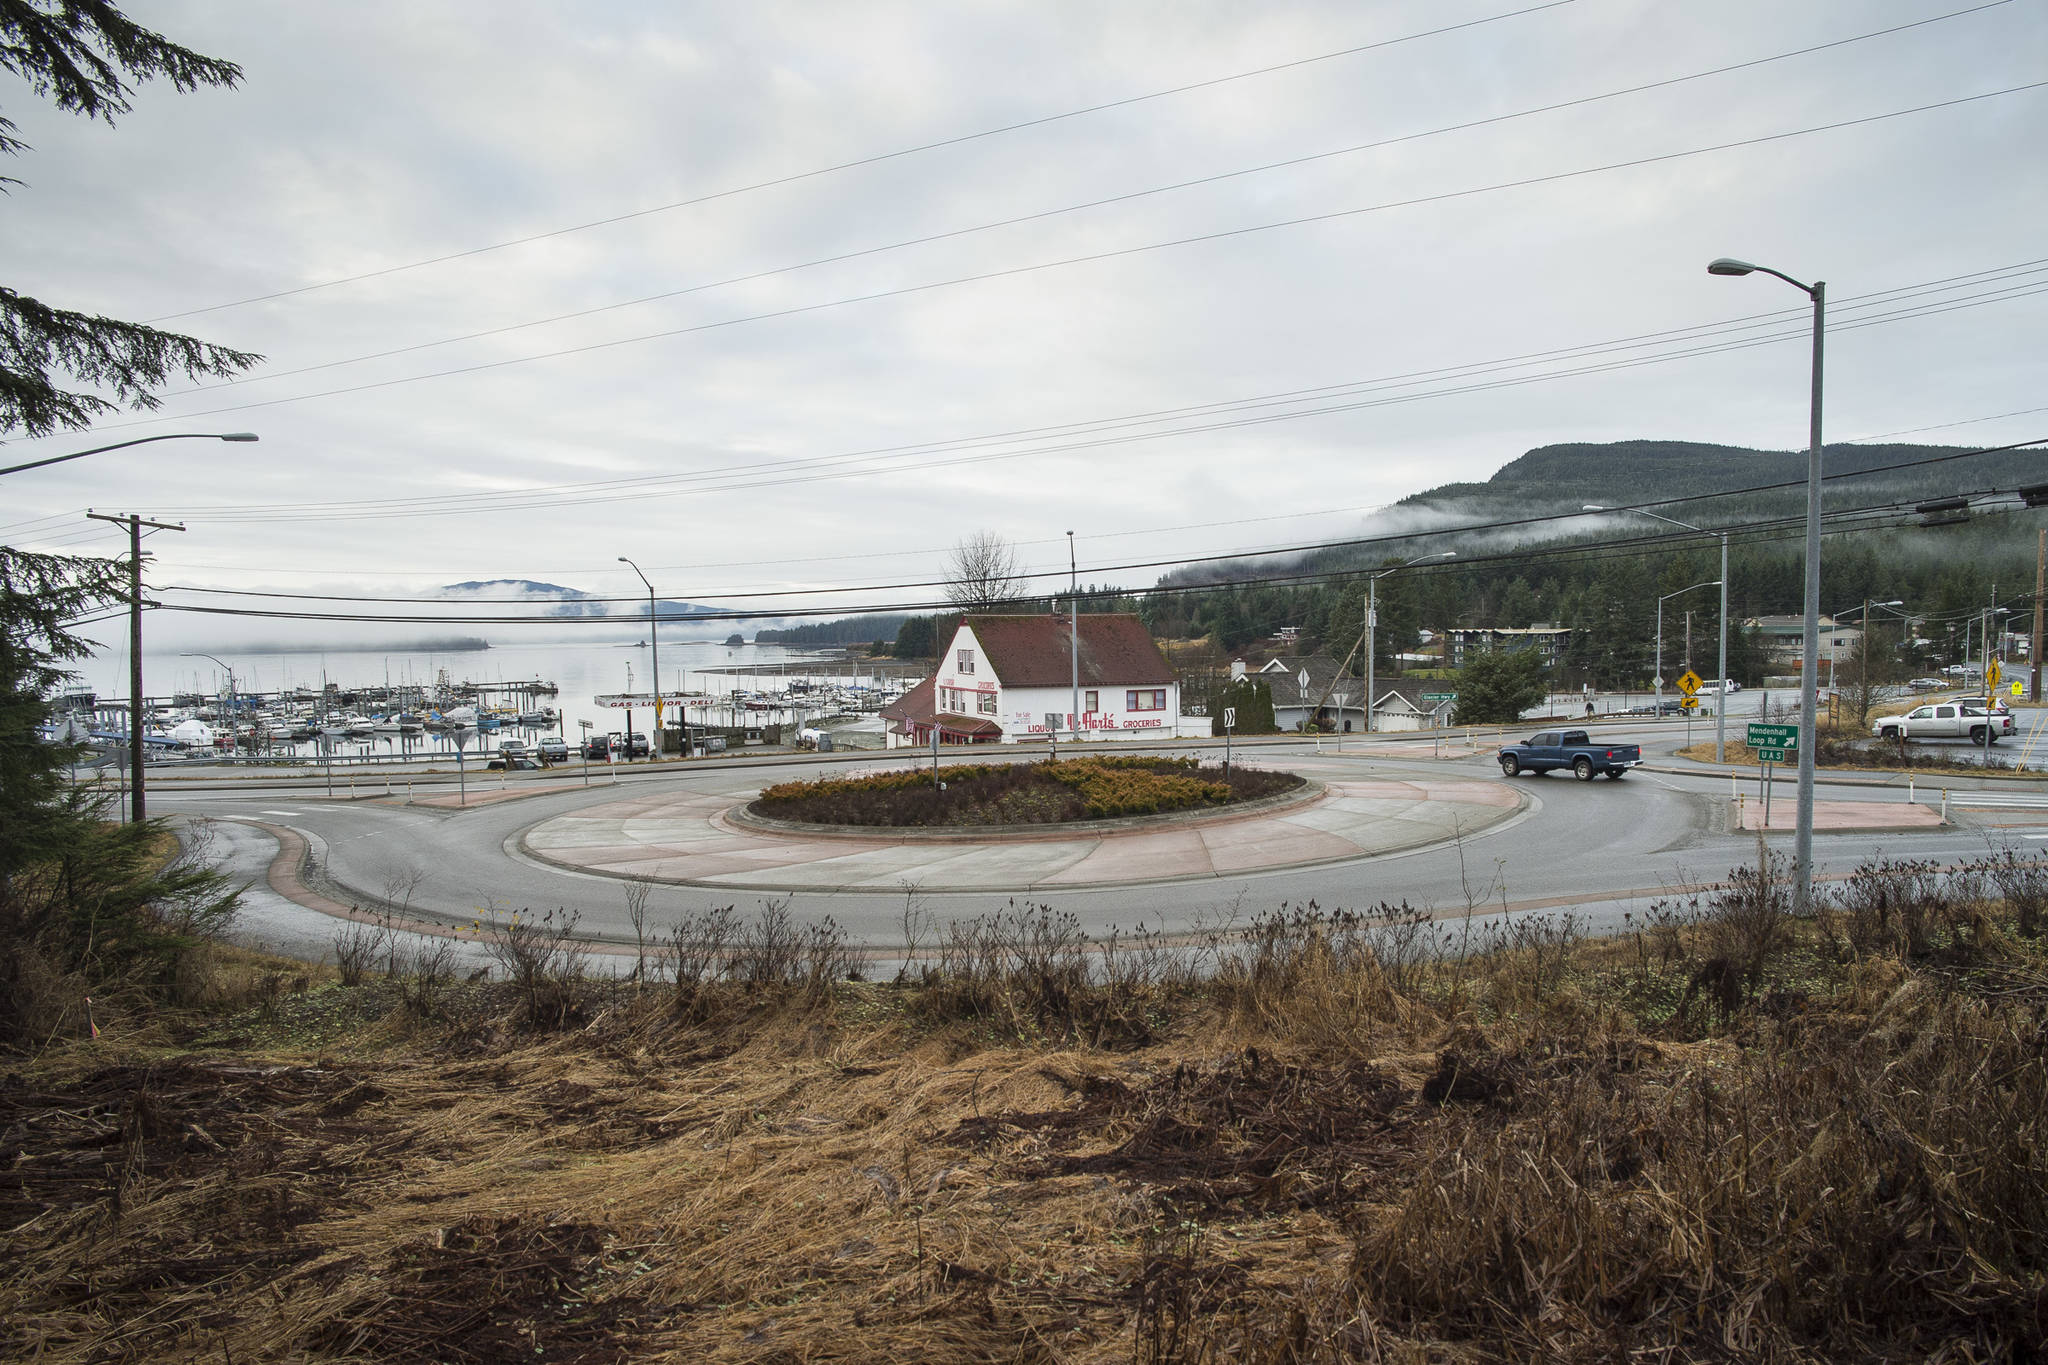 Businesses, schools, churches and public facilities line Veterans Memorial Highway running through Auke Bay on Wednesday, Nov. 28, 2018. The Planning Commission’s Auke Bay Implementation Committee is in the midst of drafting an ordinance to create a Community Mixed Use zoning district and an Auke Bay Overlay district. (Michael Penn | Juneau Empire)